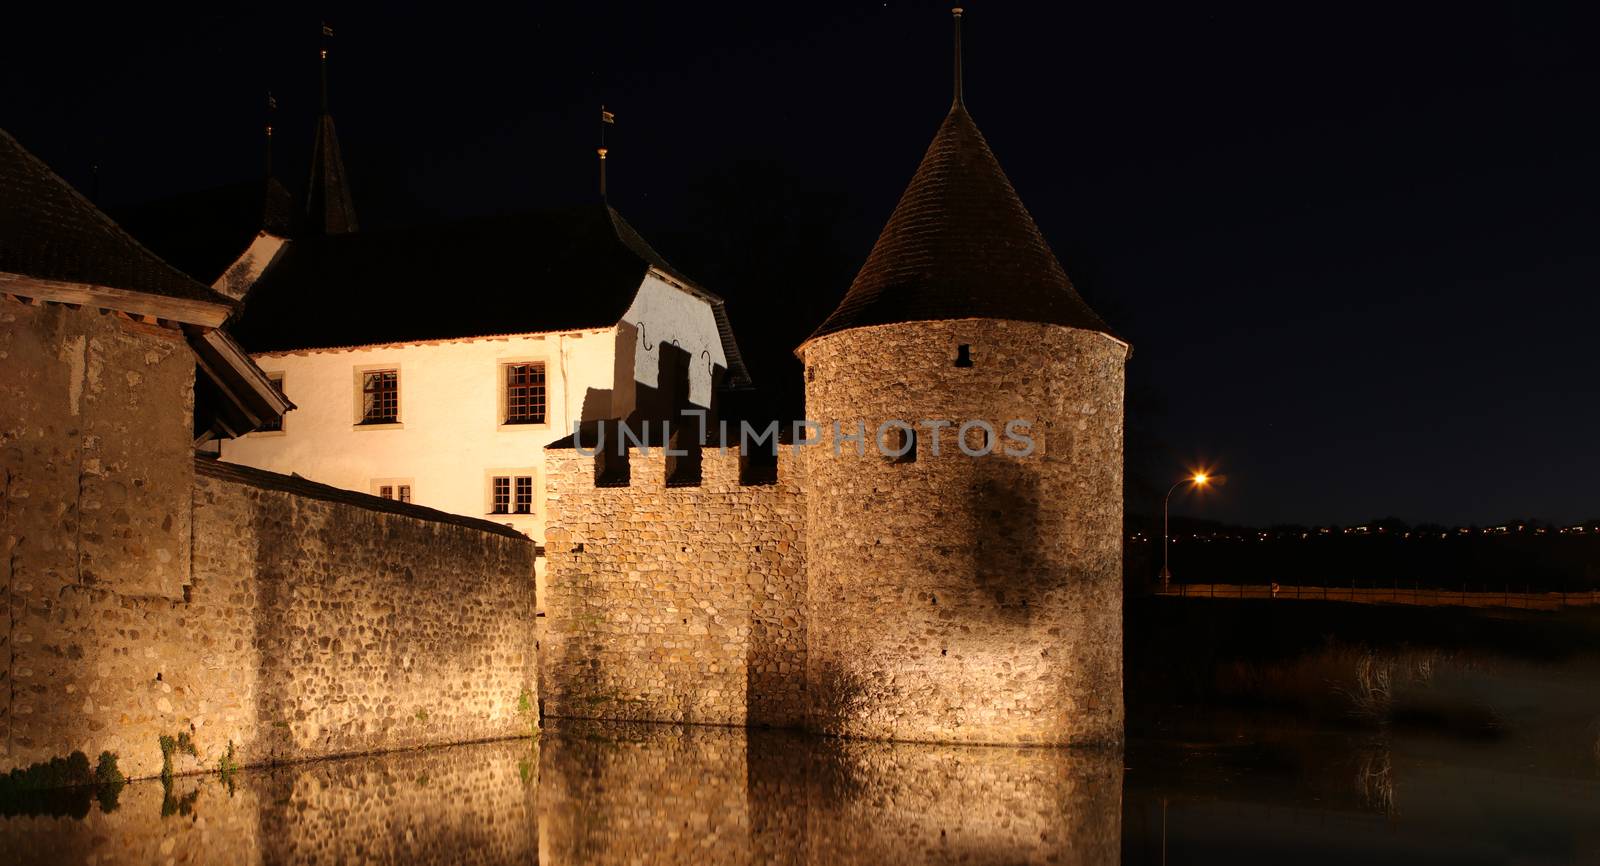 Schloss Hallwil, castle in Switzerland at night with reflection in river.